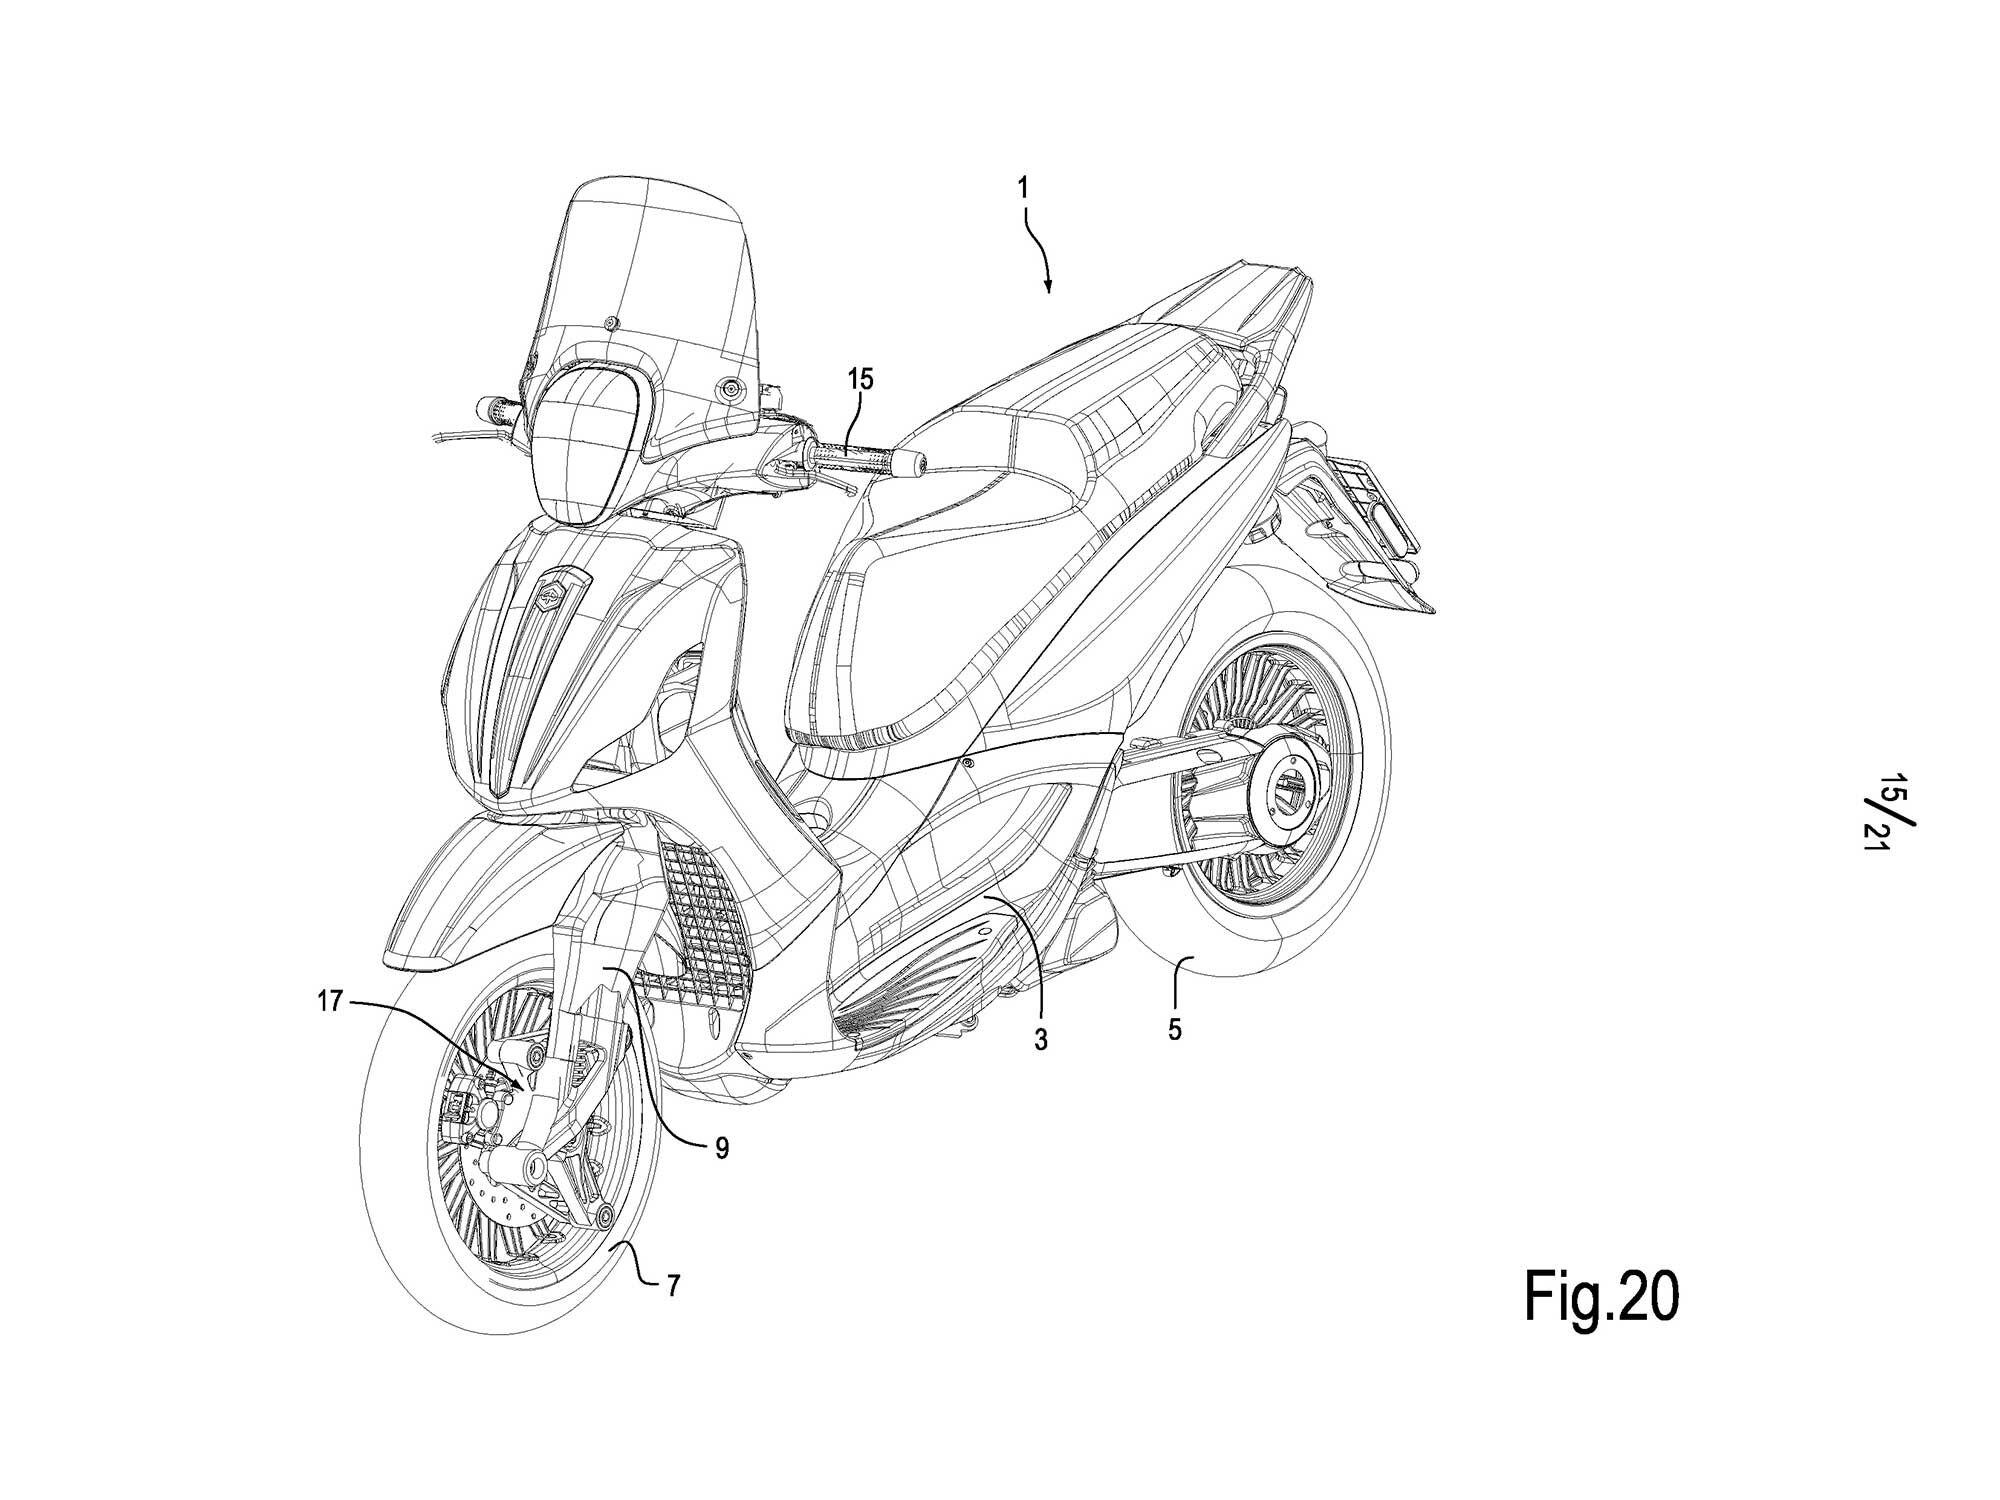 Look close at this Piaggio illustration and you’ll see their latest single-sided suspension brainwave. Interesting.